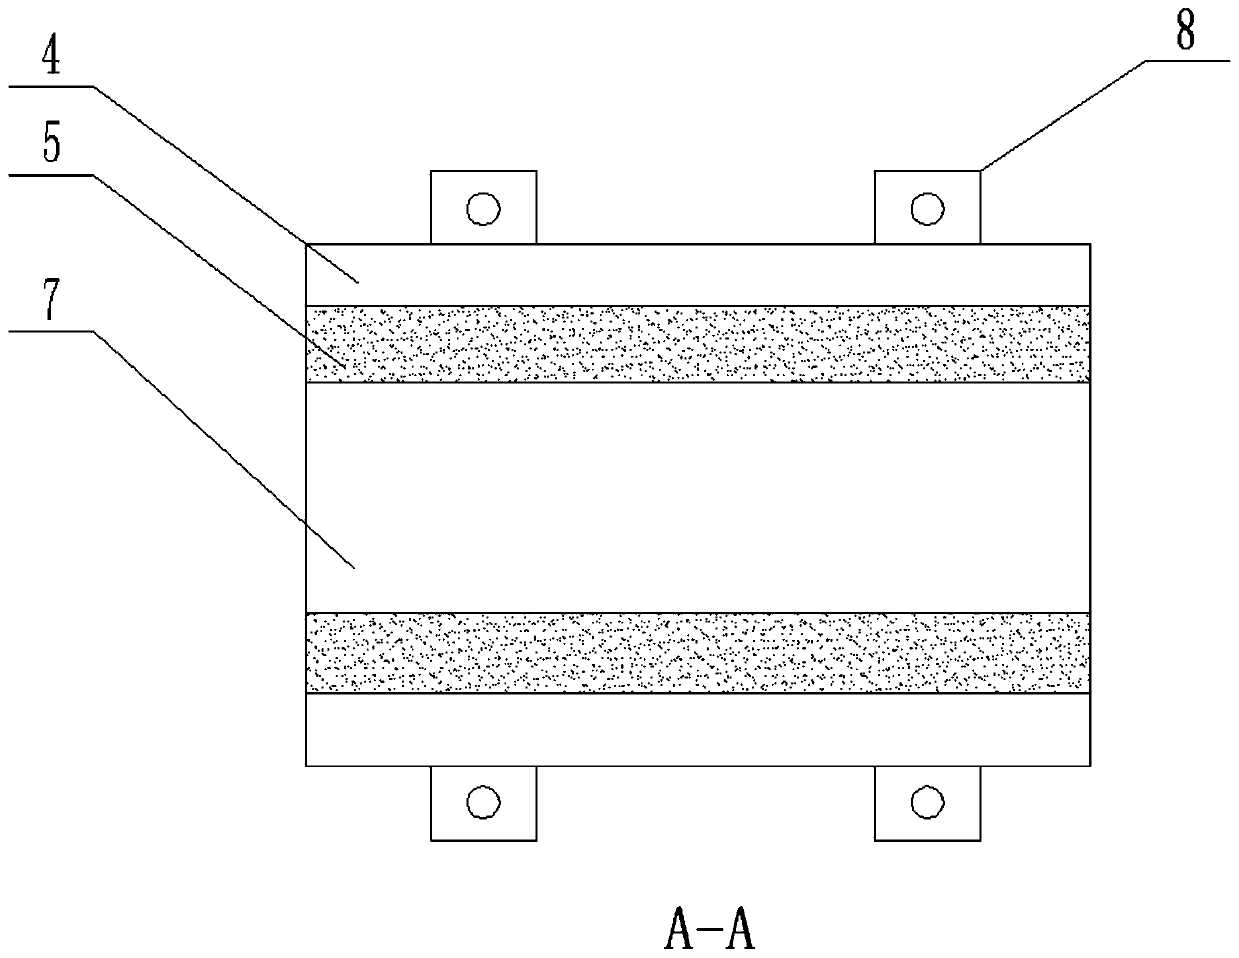 Energy dissipation and shock absorption node for steel structure